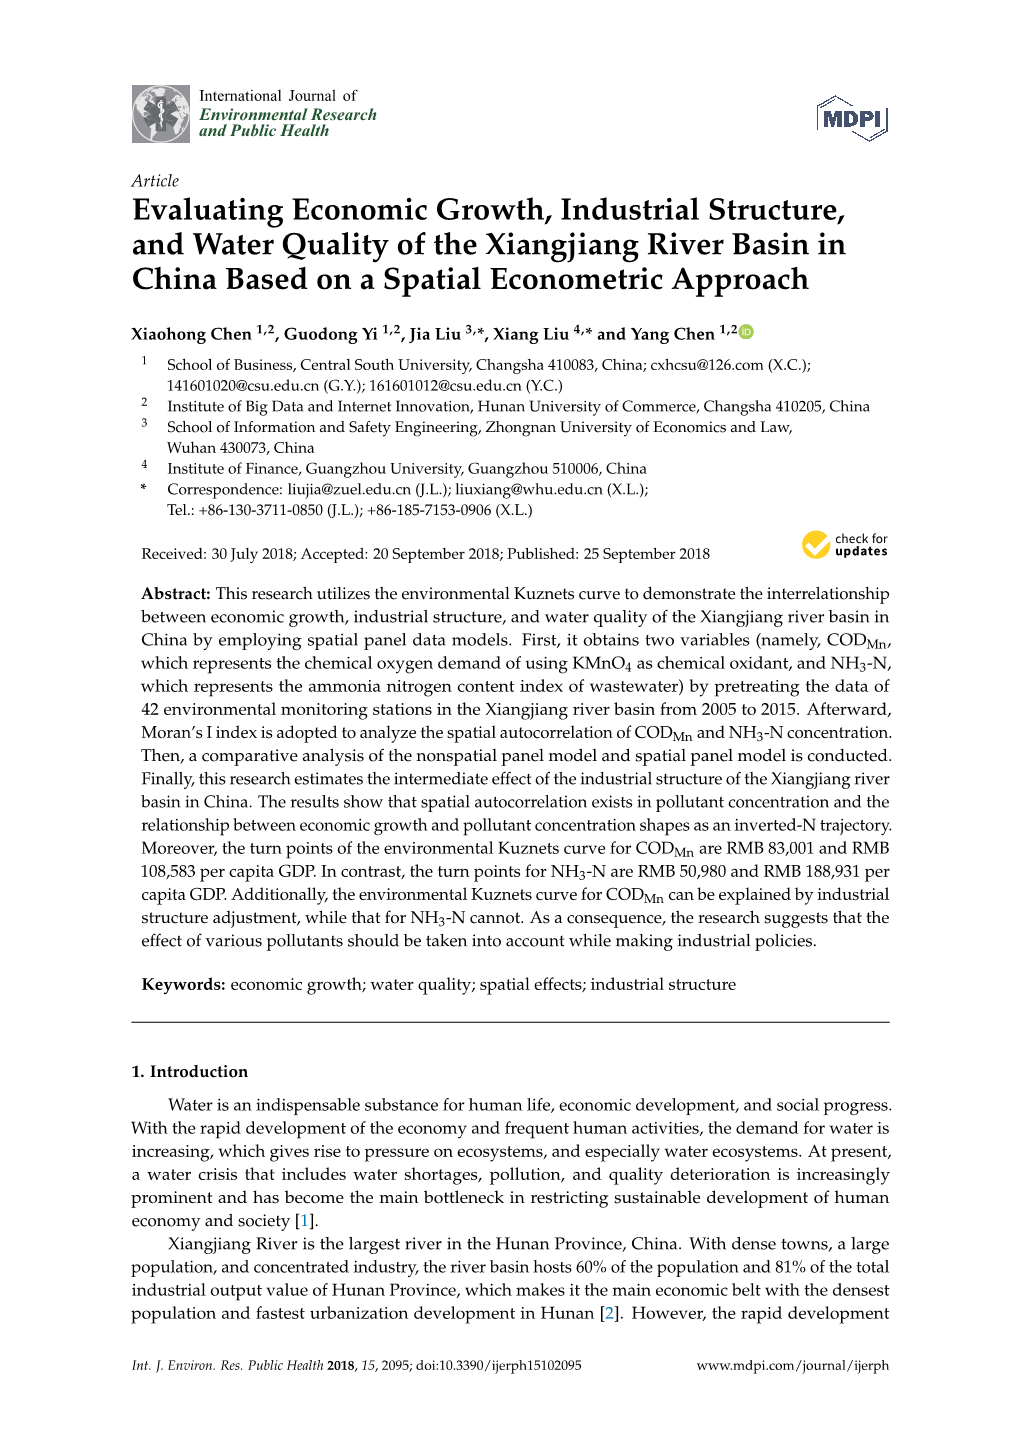 Evaluating Economic Growth, Industrial Structure, and Water Quality of the Xiangjiang River Basin in China Based on a Spatial Econometric Approach